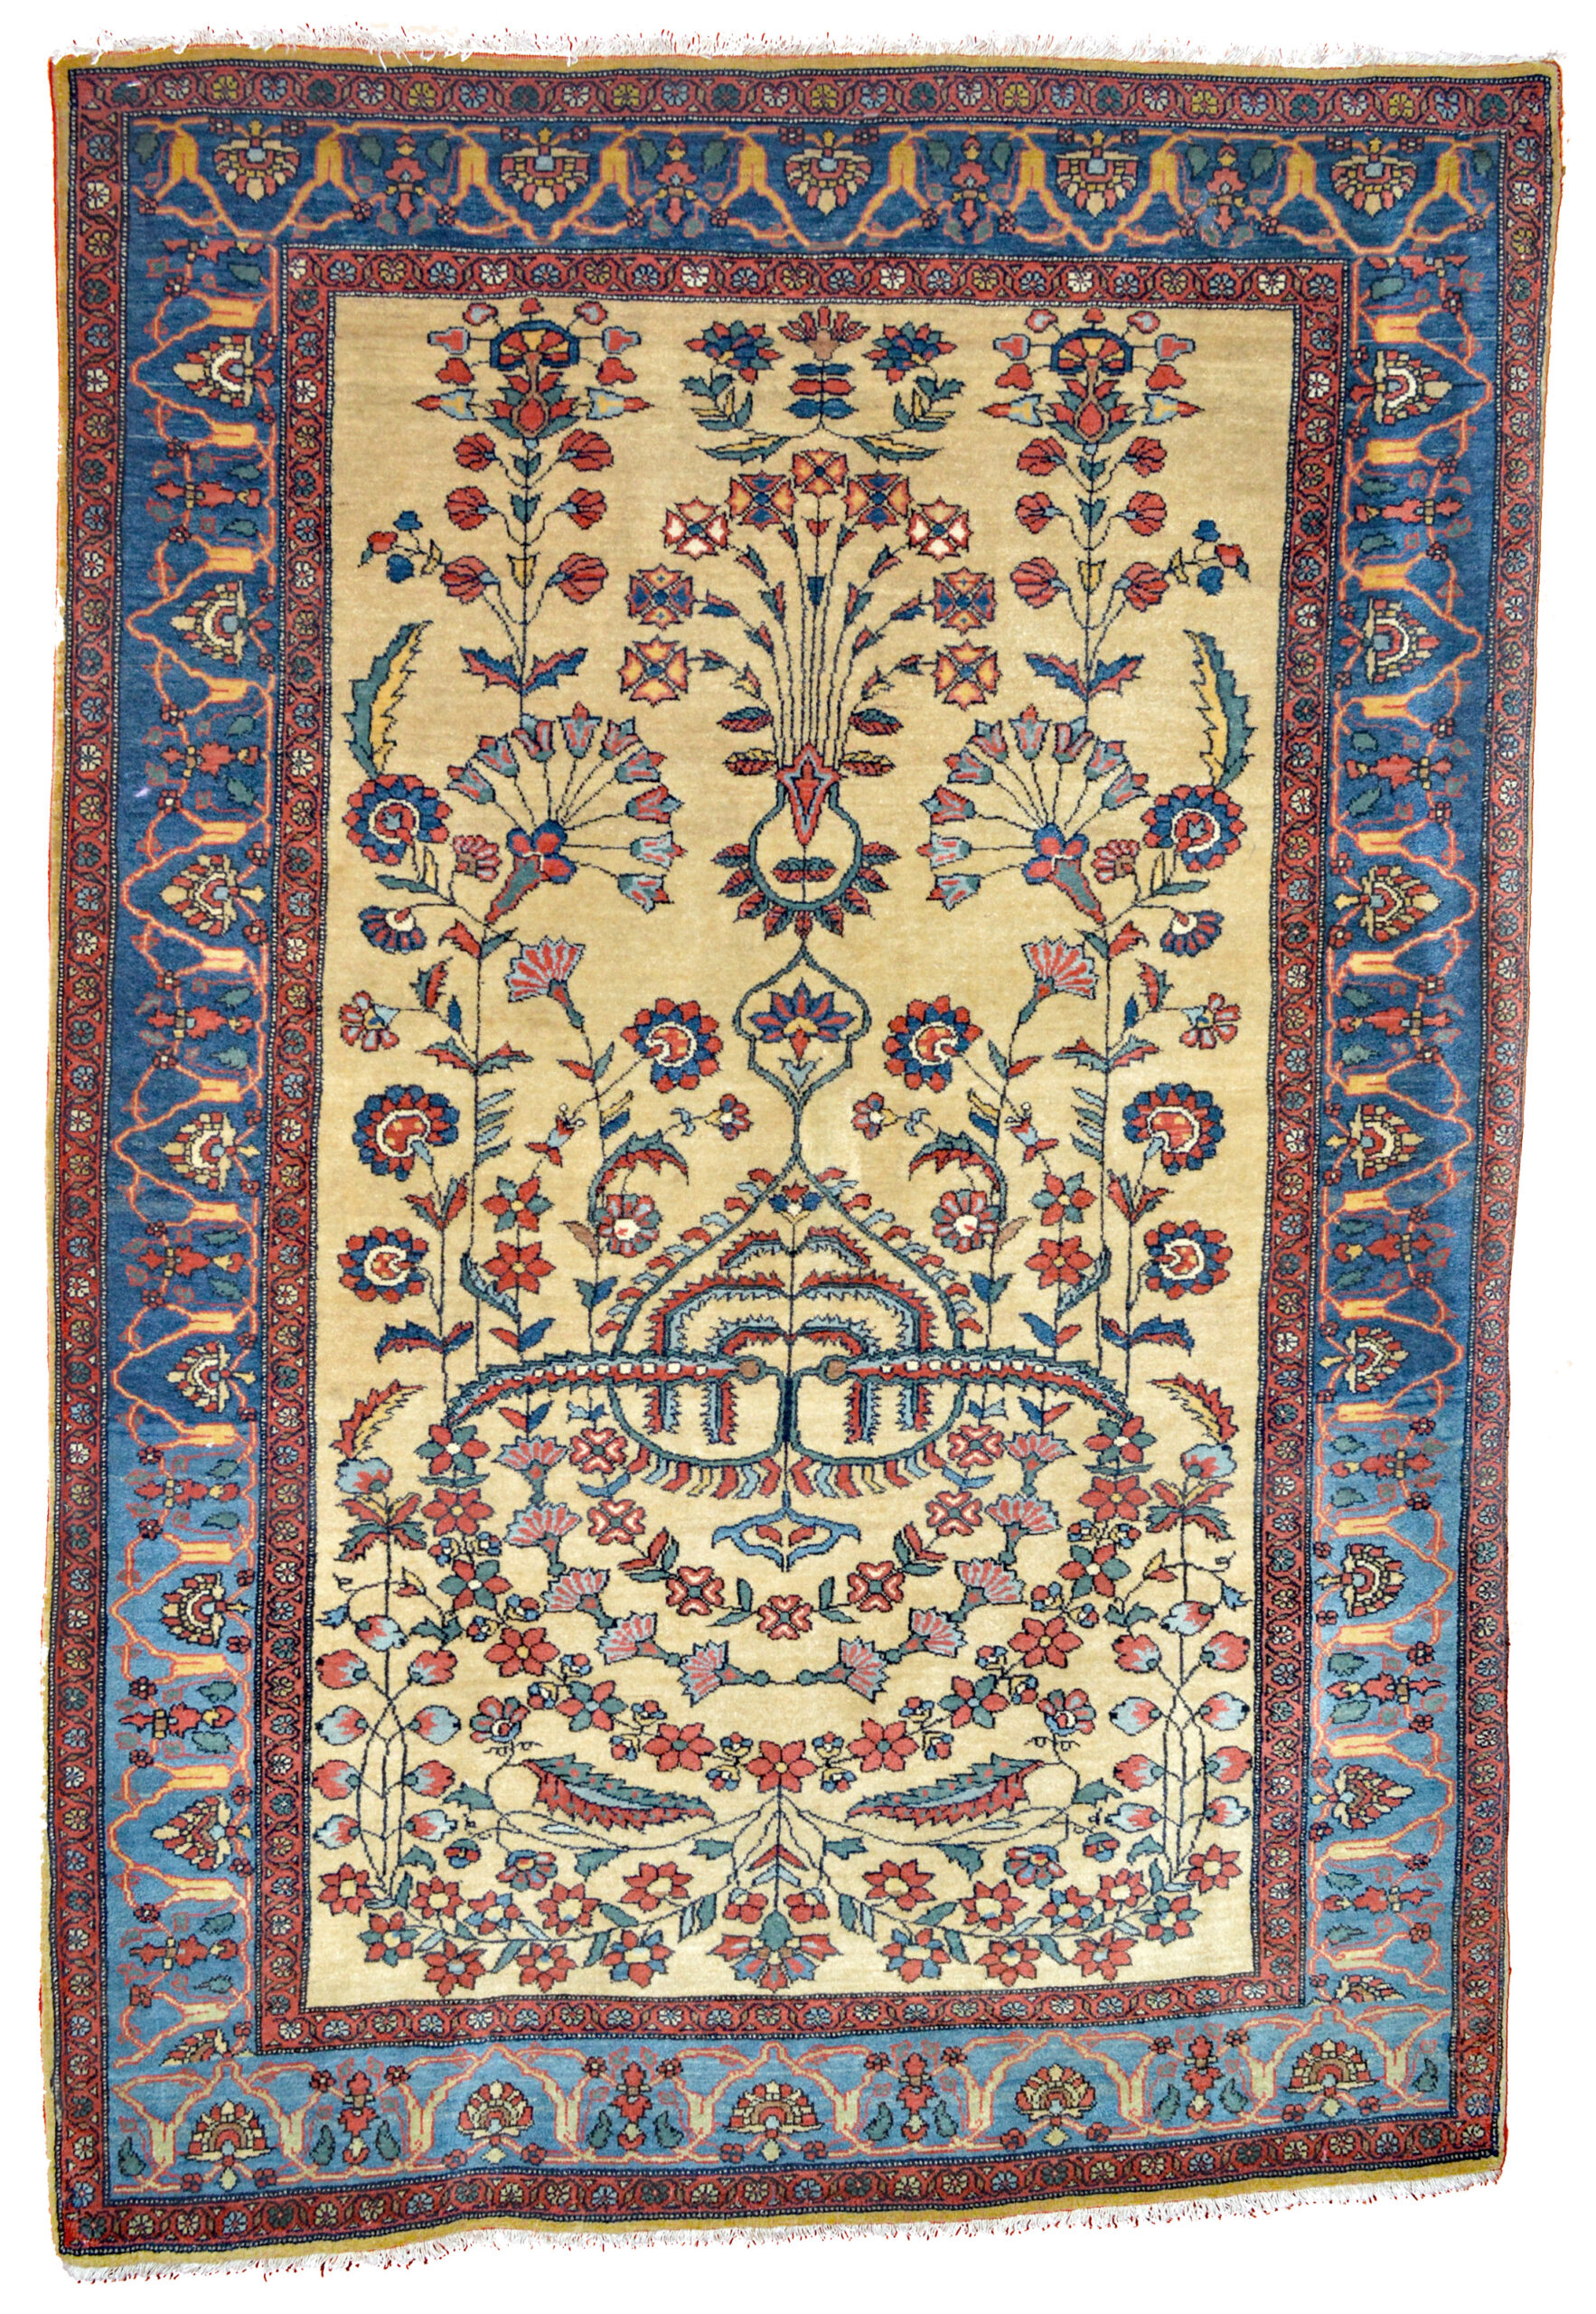 An antique Persian Fereghan Sarouk rug with well spaced floral forms on an ivory field that is framed by an abrashed sky blue to mid blue border, circa 1900 - Douglas Stock Gallery is one of America's most highly regarded dealers in antique Oriental rugs, shop located in the Boston,MA area in historic South Natick,MA New England, antique rugs New York by appointment, antique rugs Washington DC by appointment